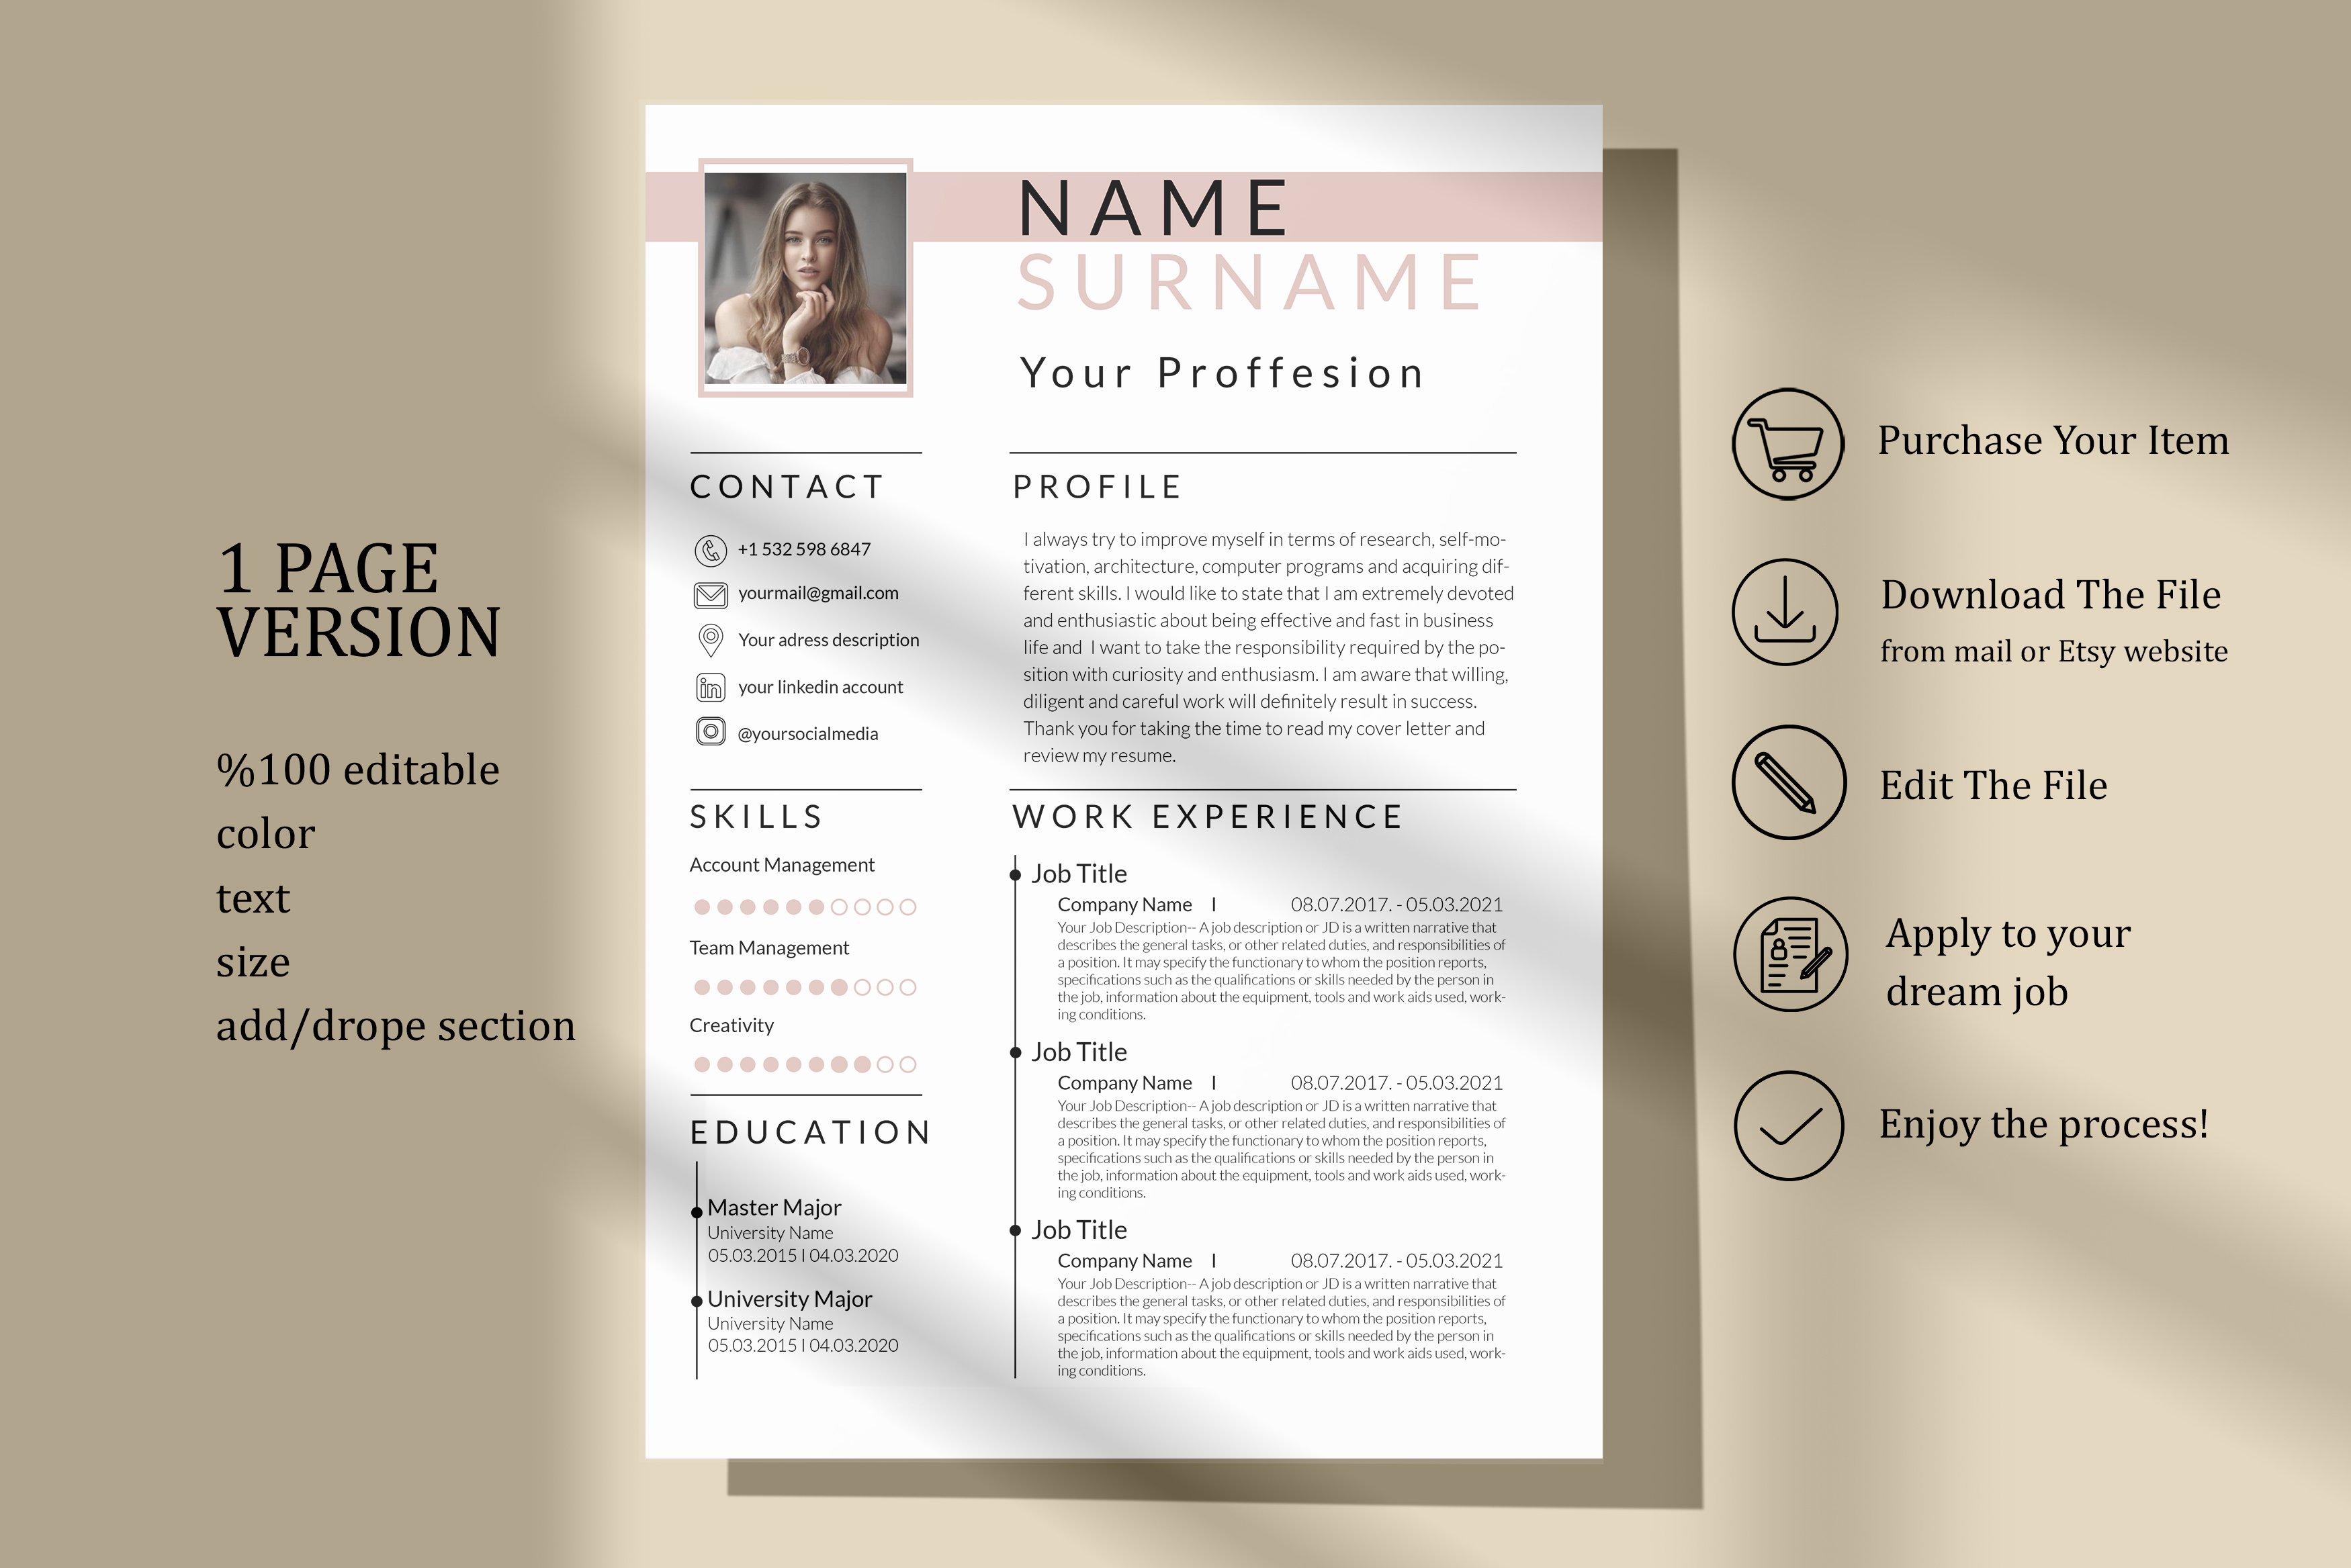 Minimal resume template cover image.